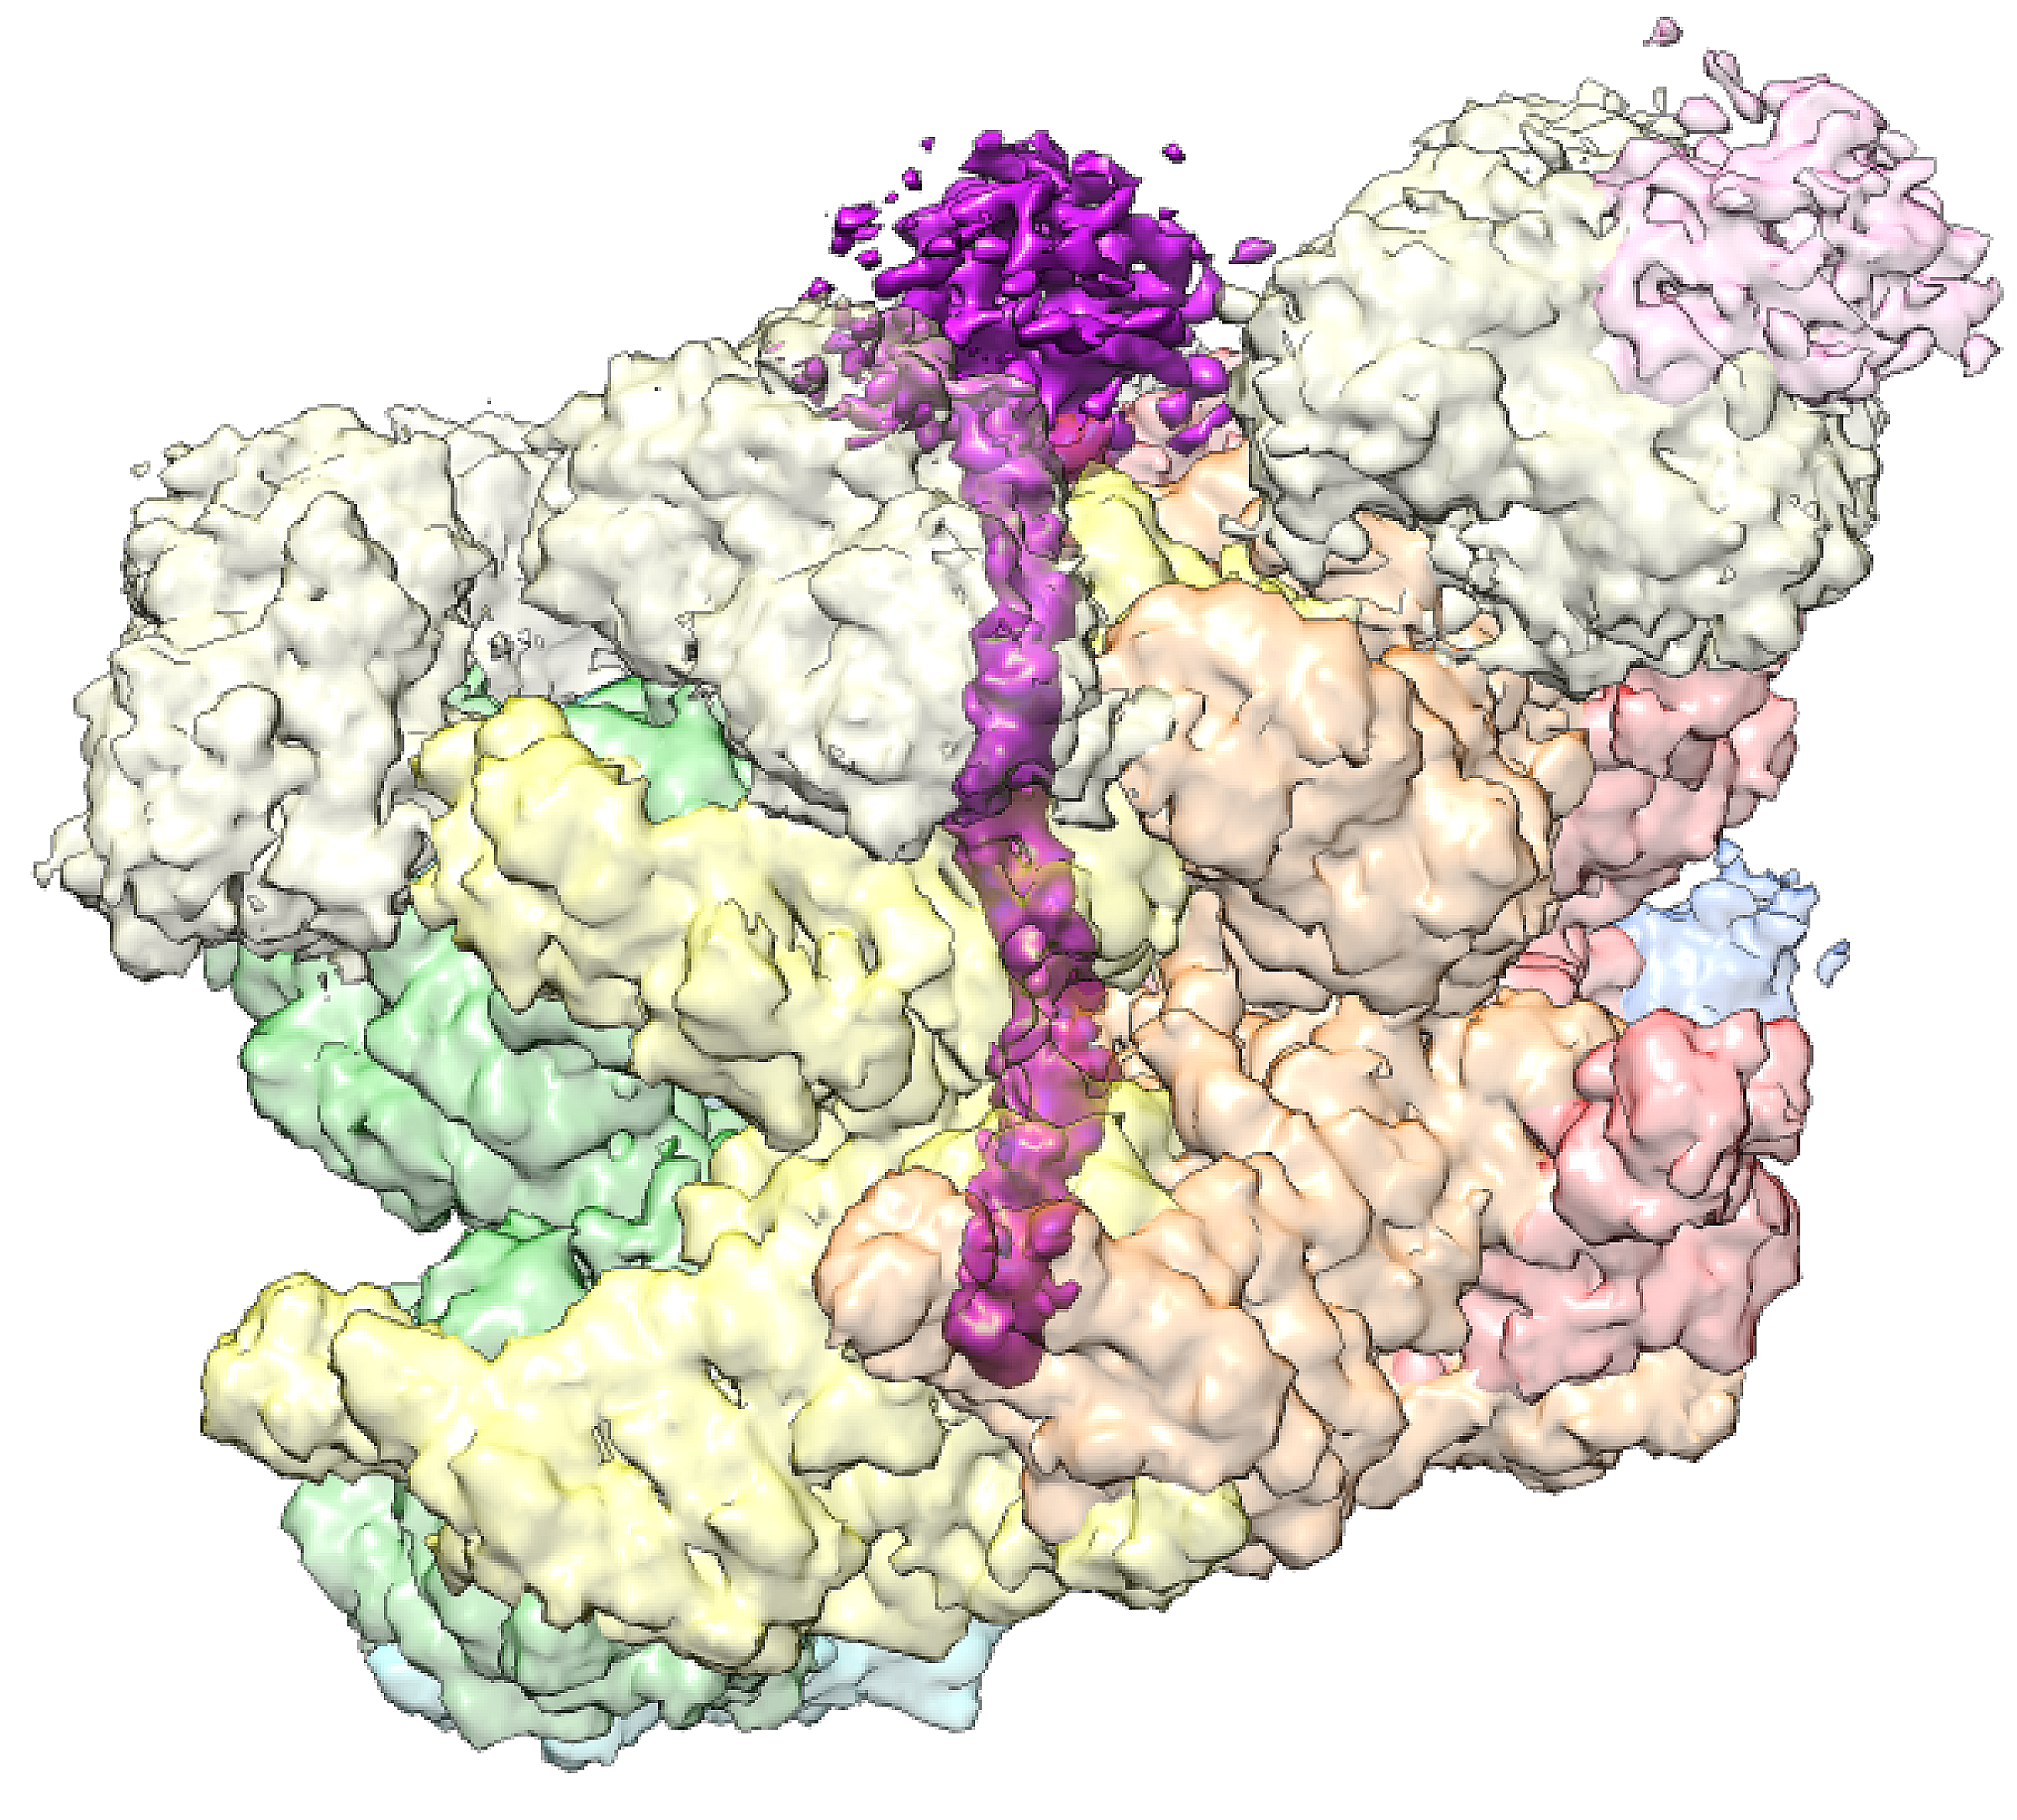 Cdc48 AAA ATPase unfolding a protein substrate